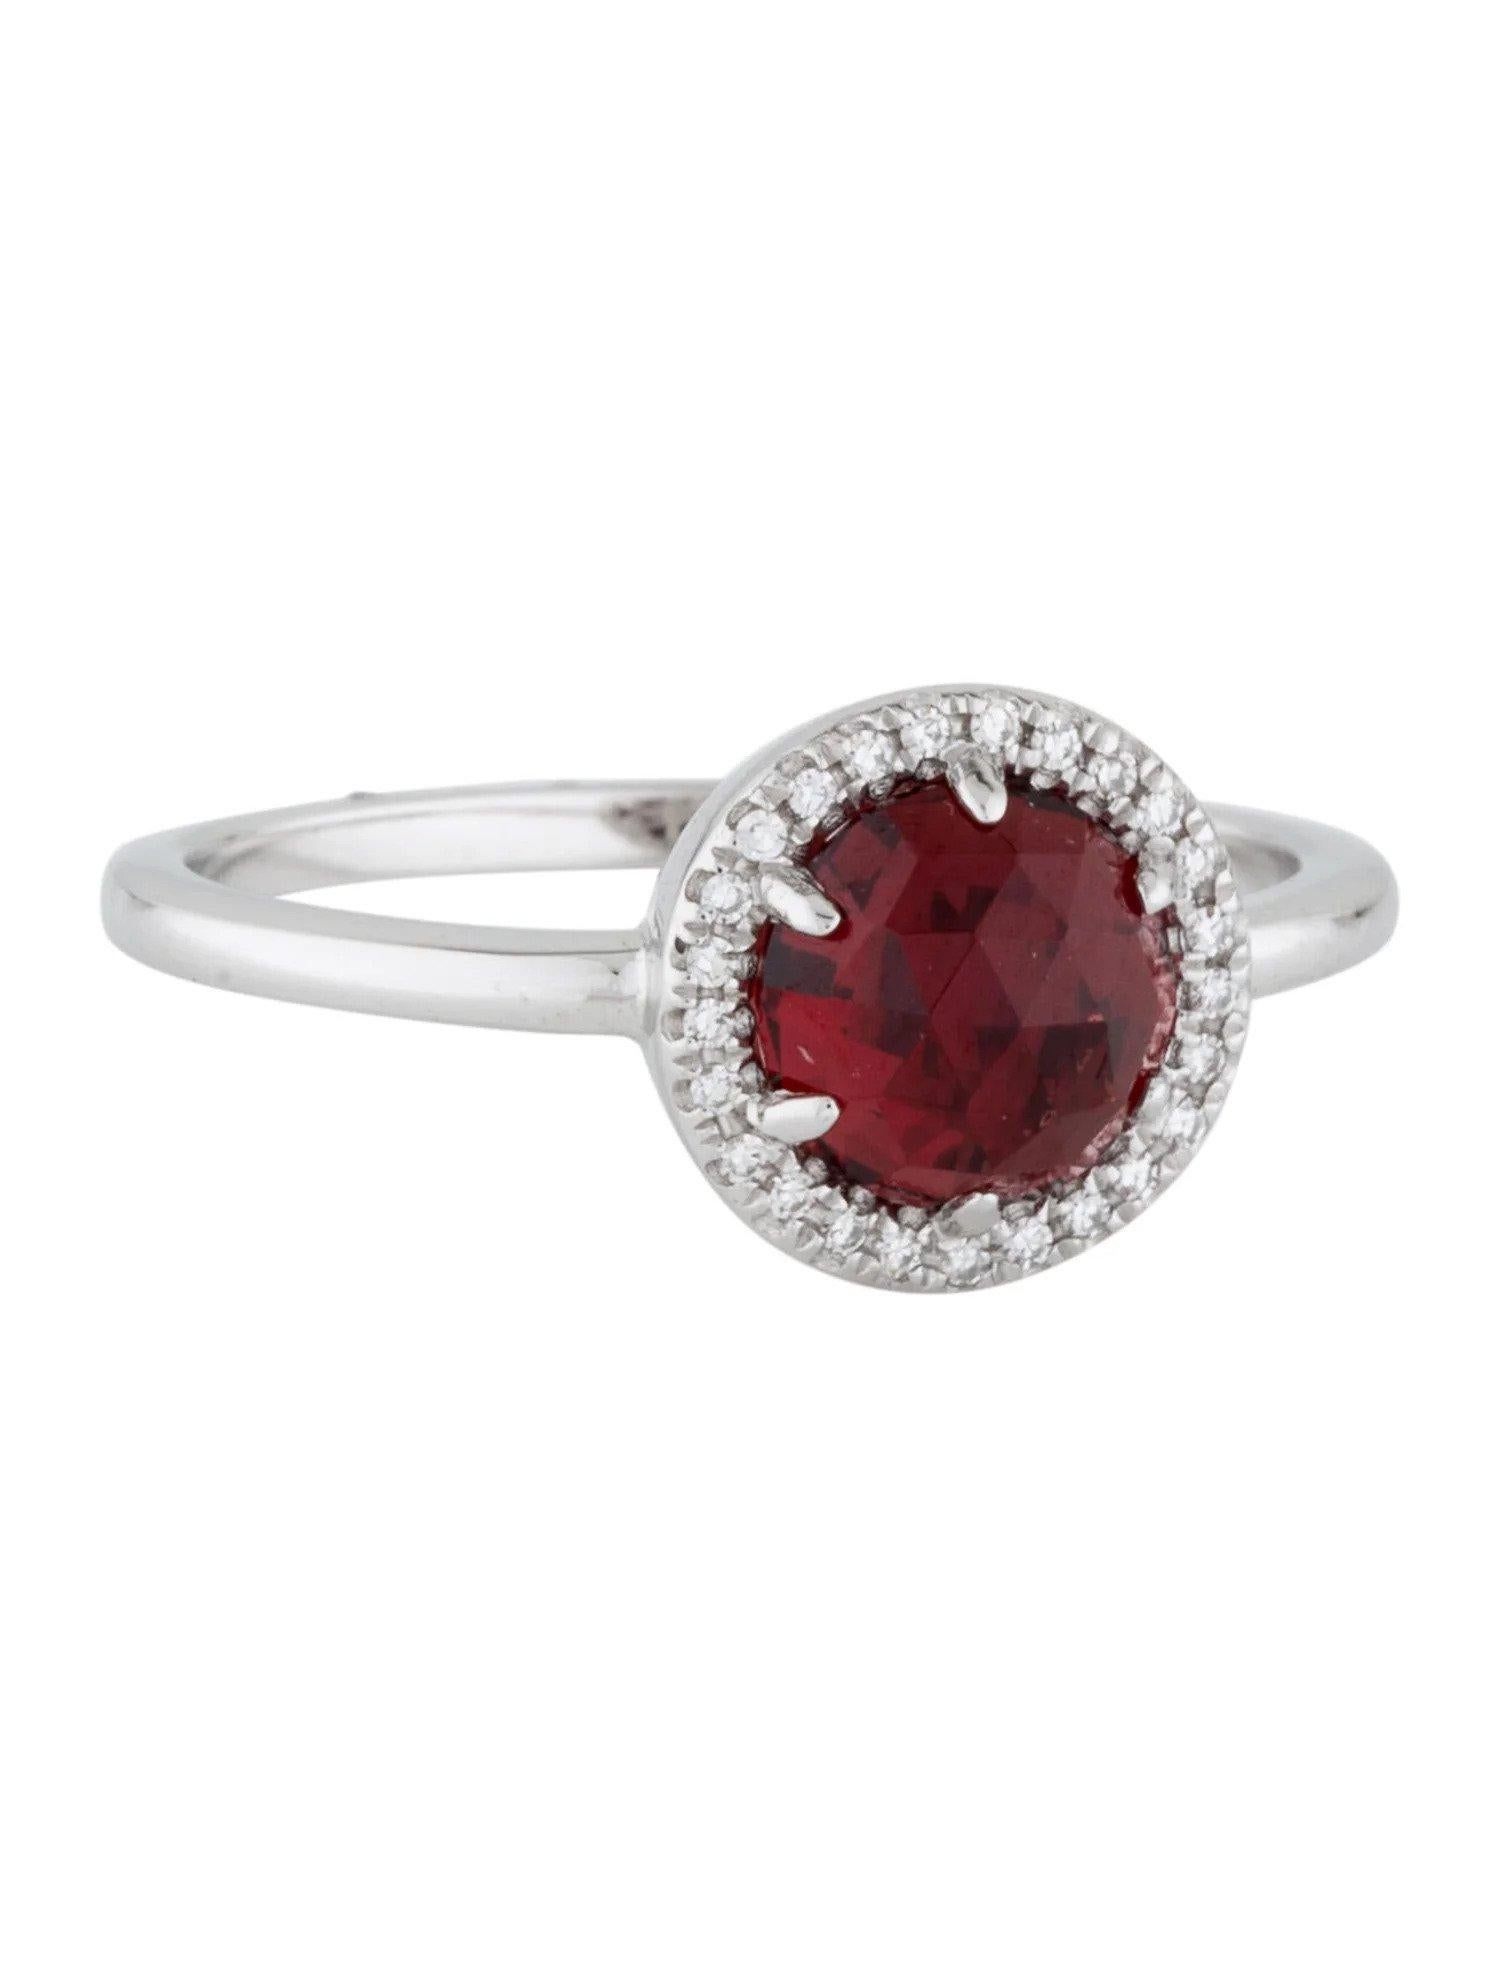 1.48 Carat Round Garnet & Diamond White Gold Ring In New Condition For Sale In Great Neck, NY